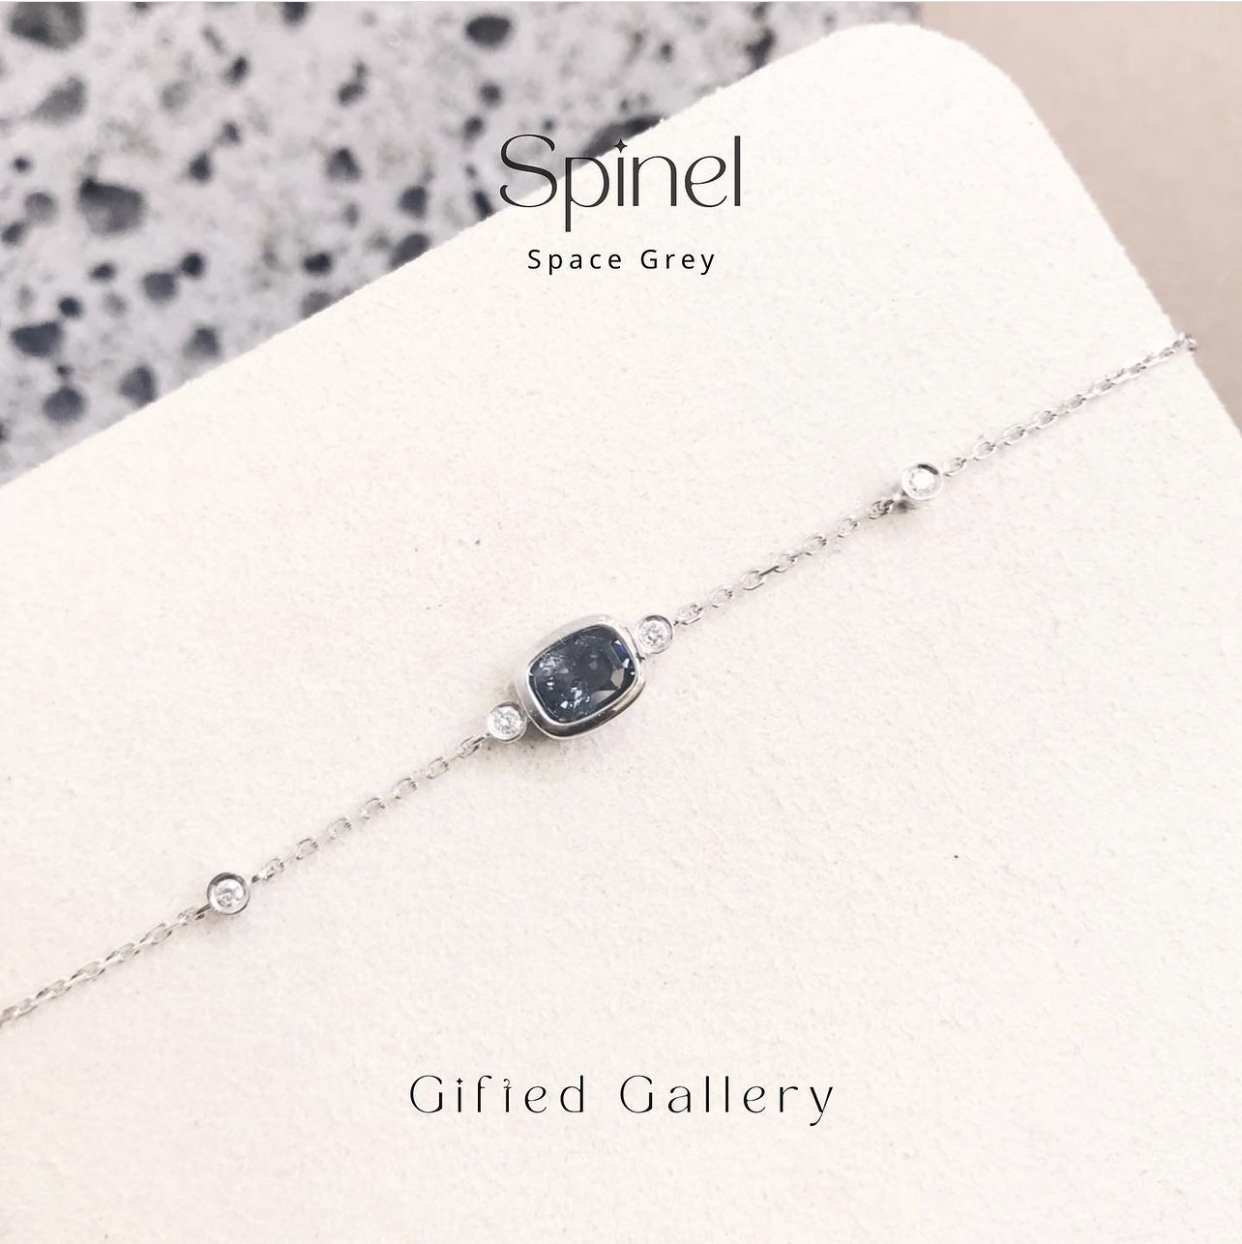 Space Grey Spinel Bracelet By Gifted Gallery